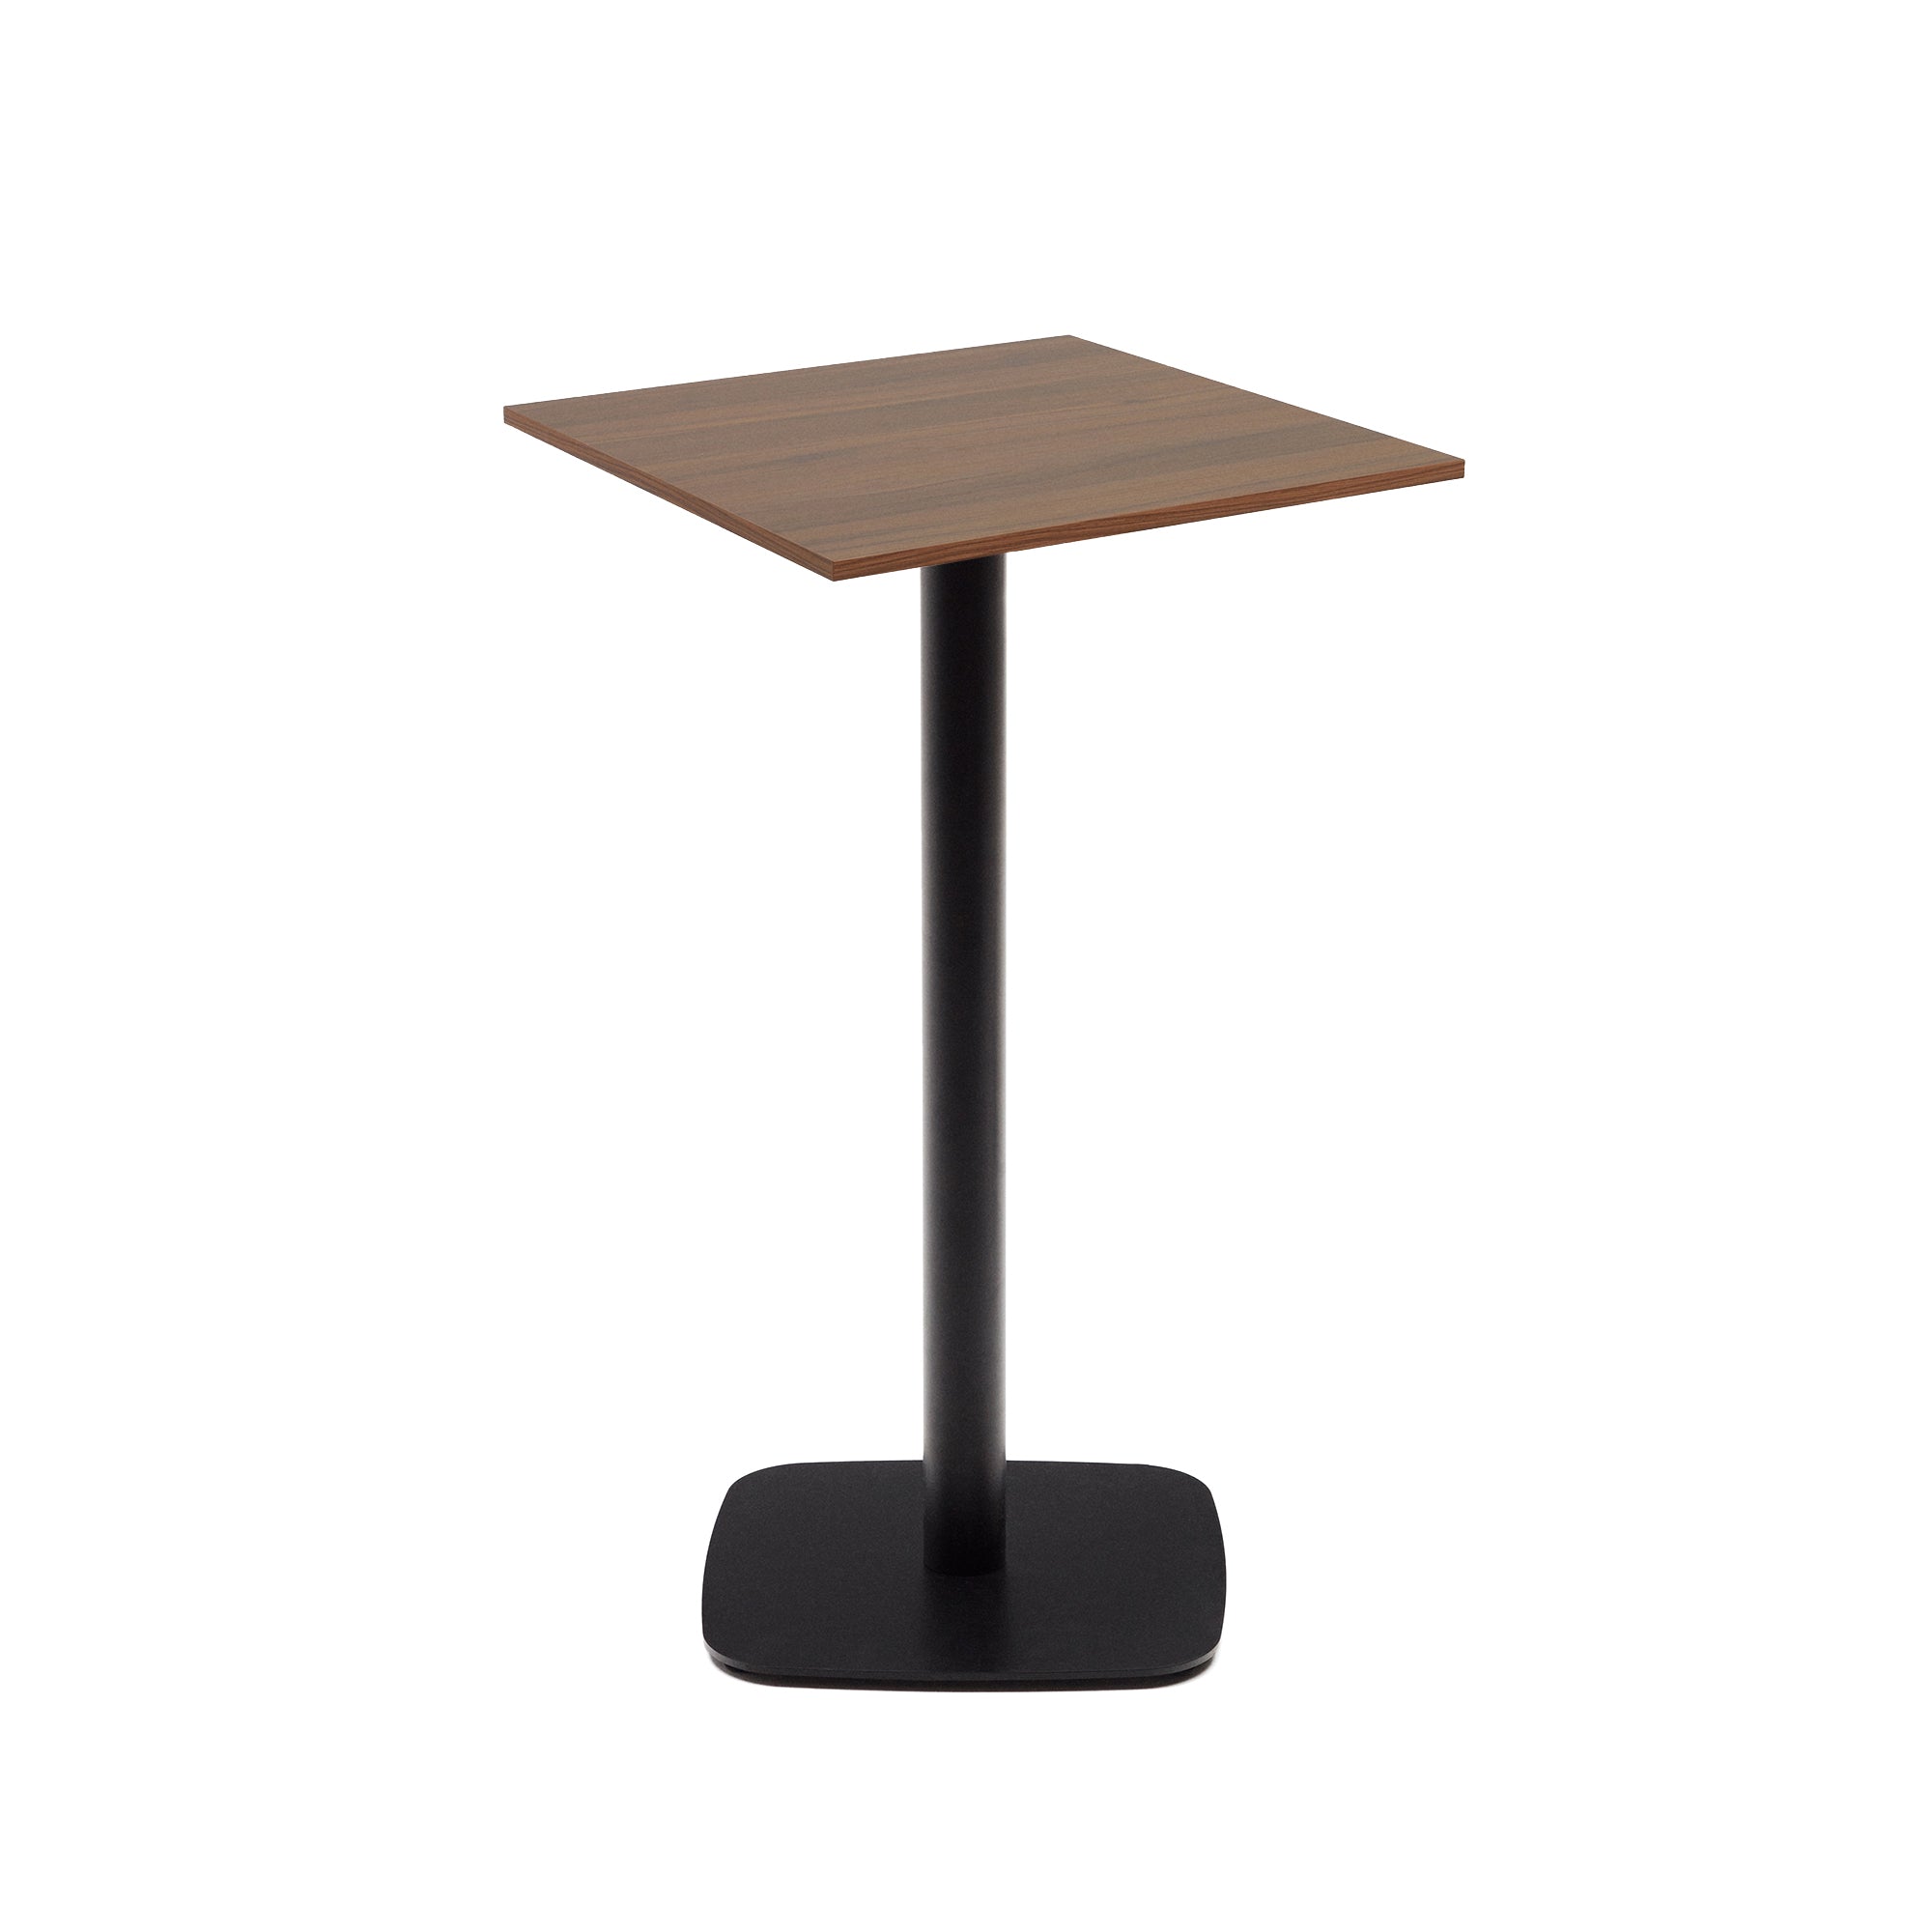 Dina high table in walnut finish melamine with metal leg in a painted black finish, 60x60x96 cm